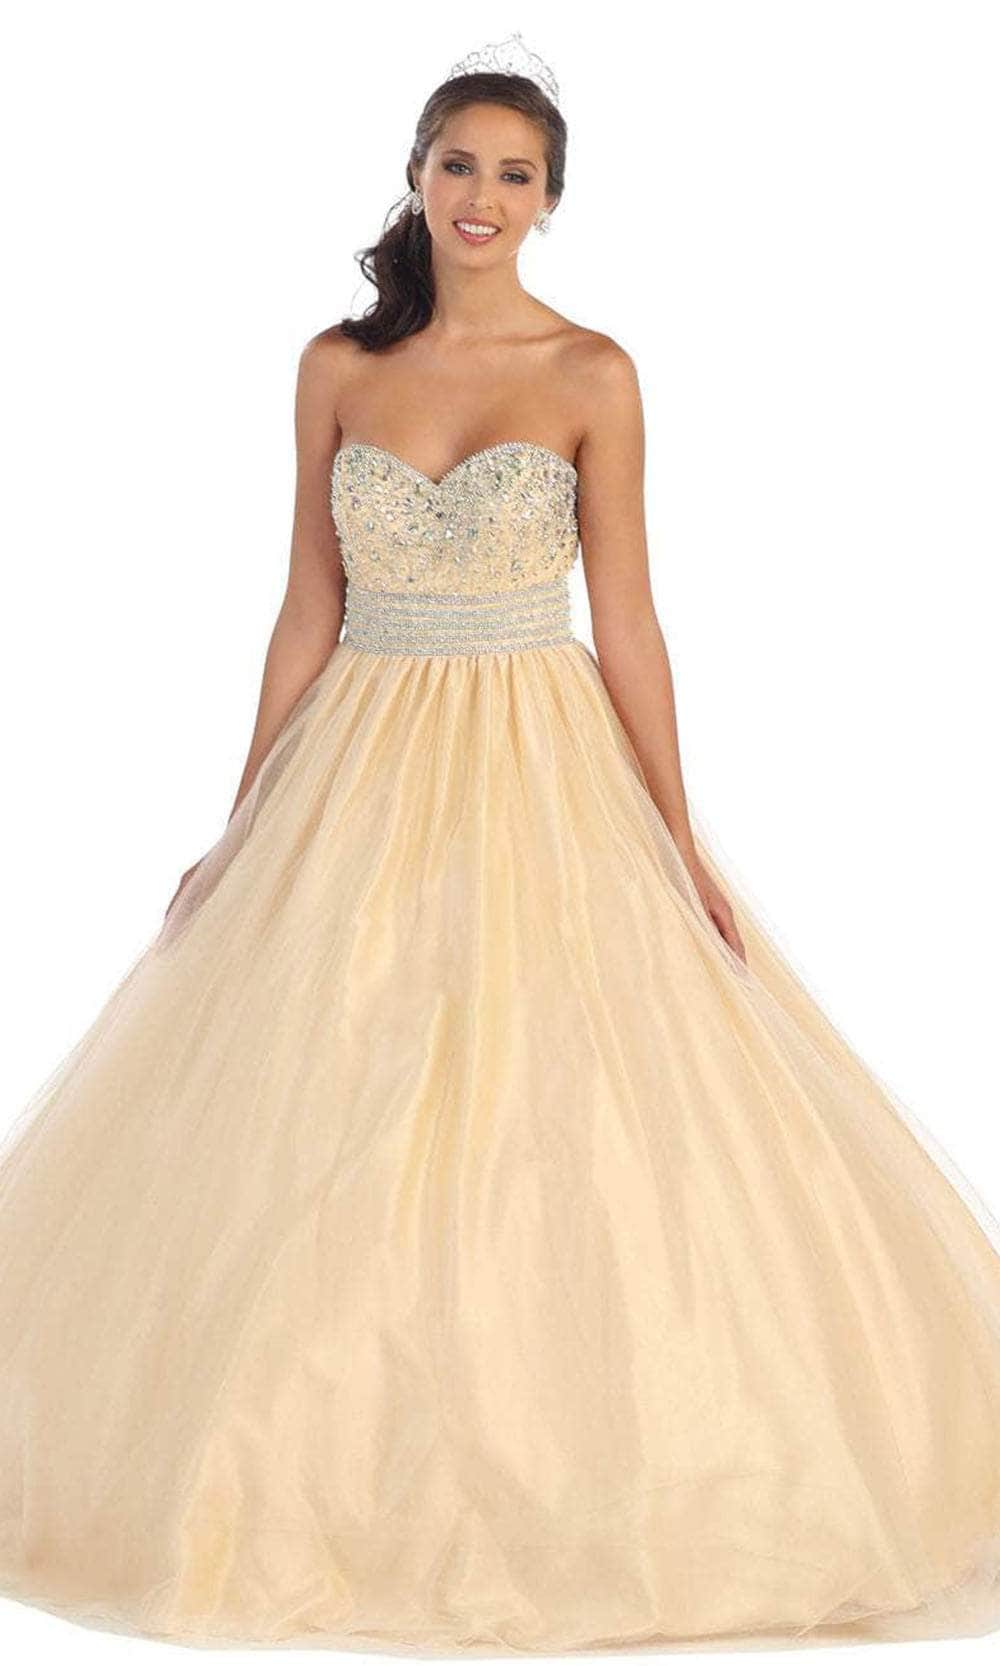 Image of May Queen LK60 - Strapless Embellished Ballgown